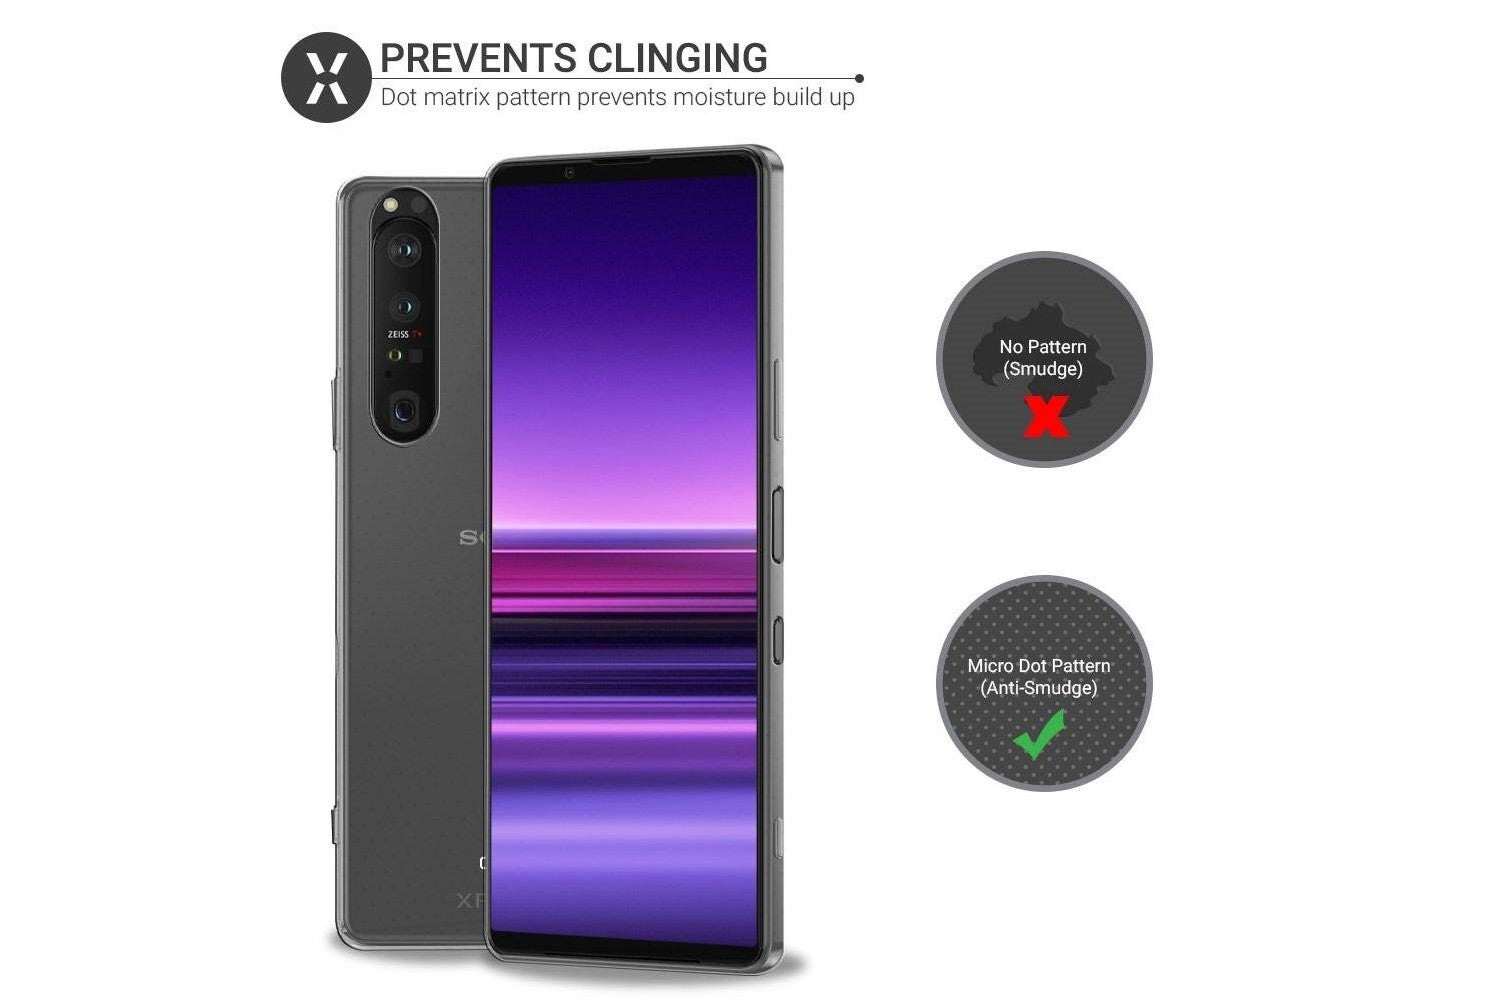 Case maker may have outed Sony Xperia 1 III and Xperia 10 III